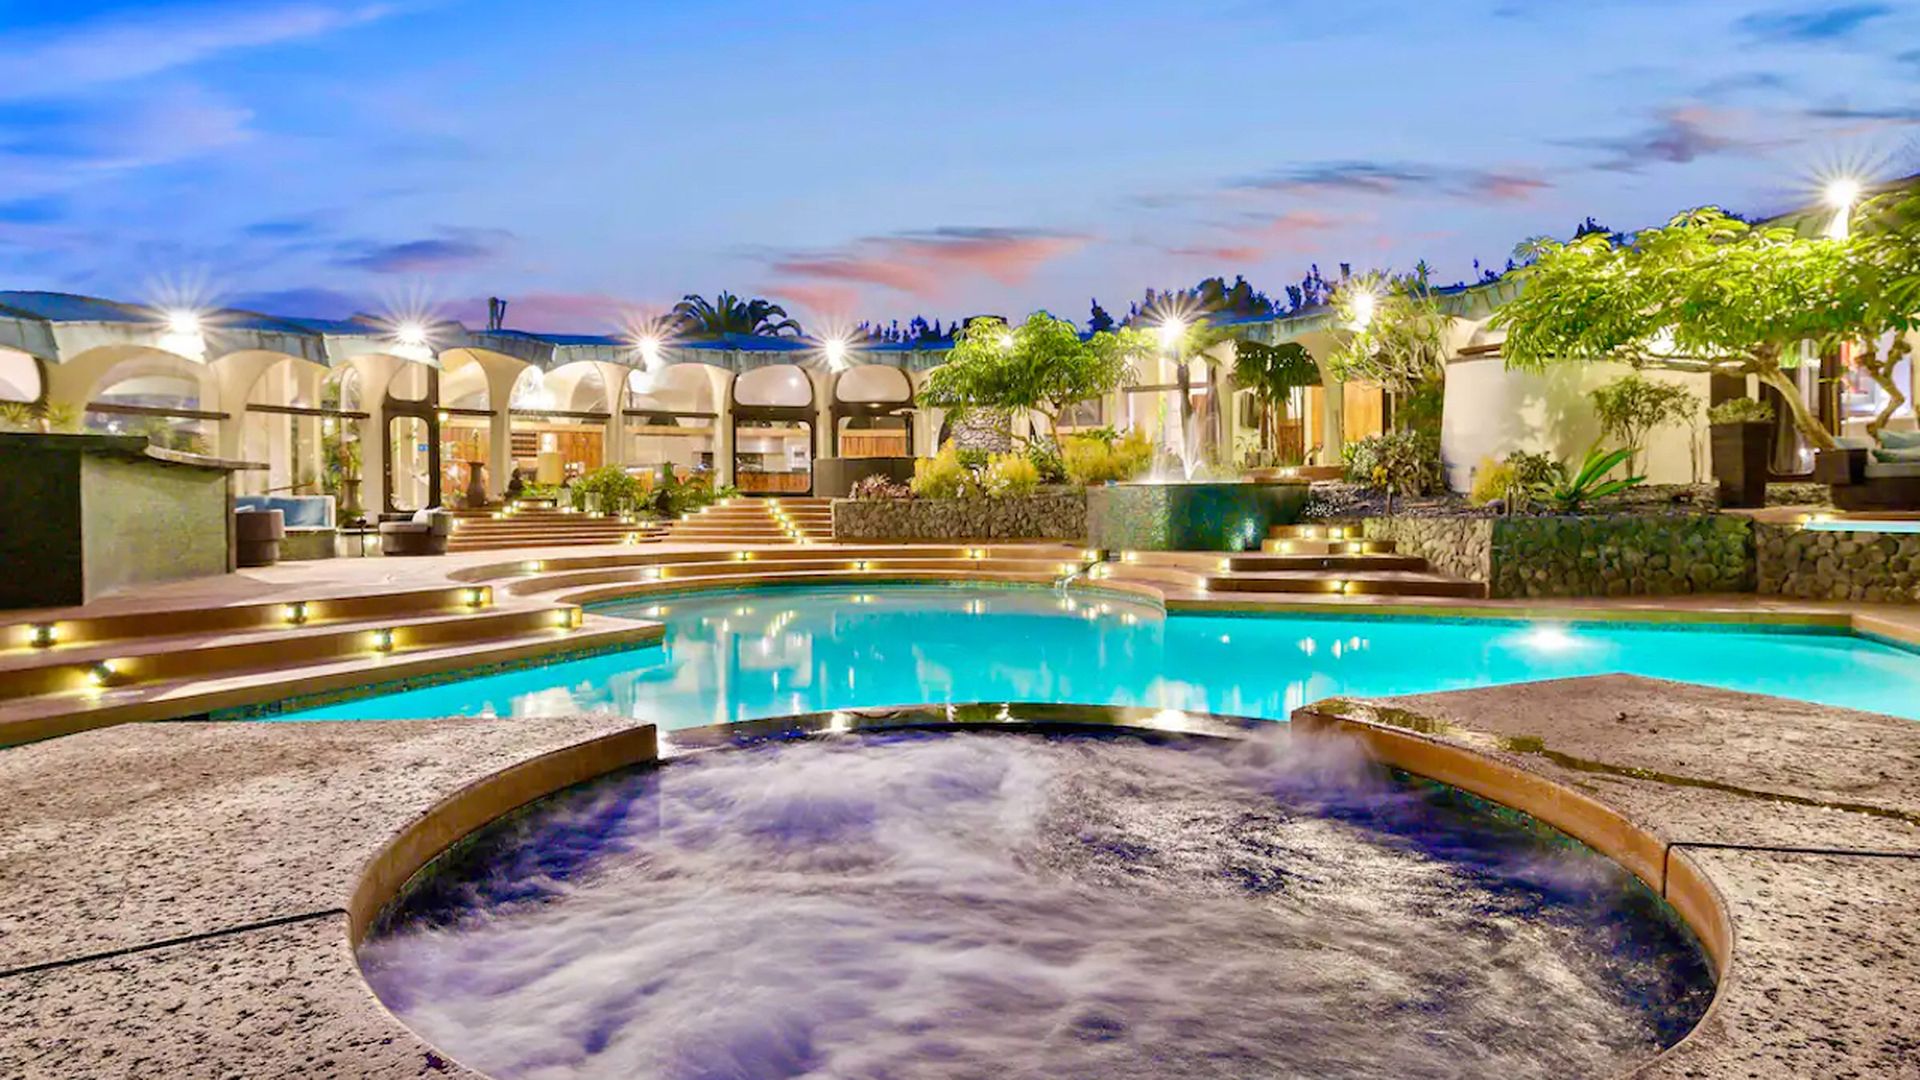 A hot tub and resort-style pool are featured in front of an expansive airbnb home at sunset. 